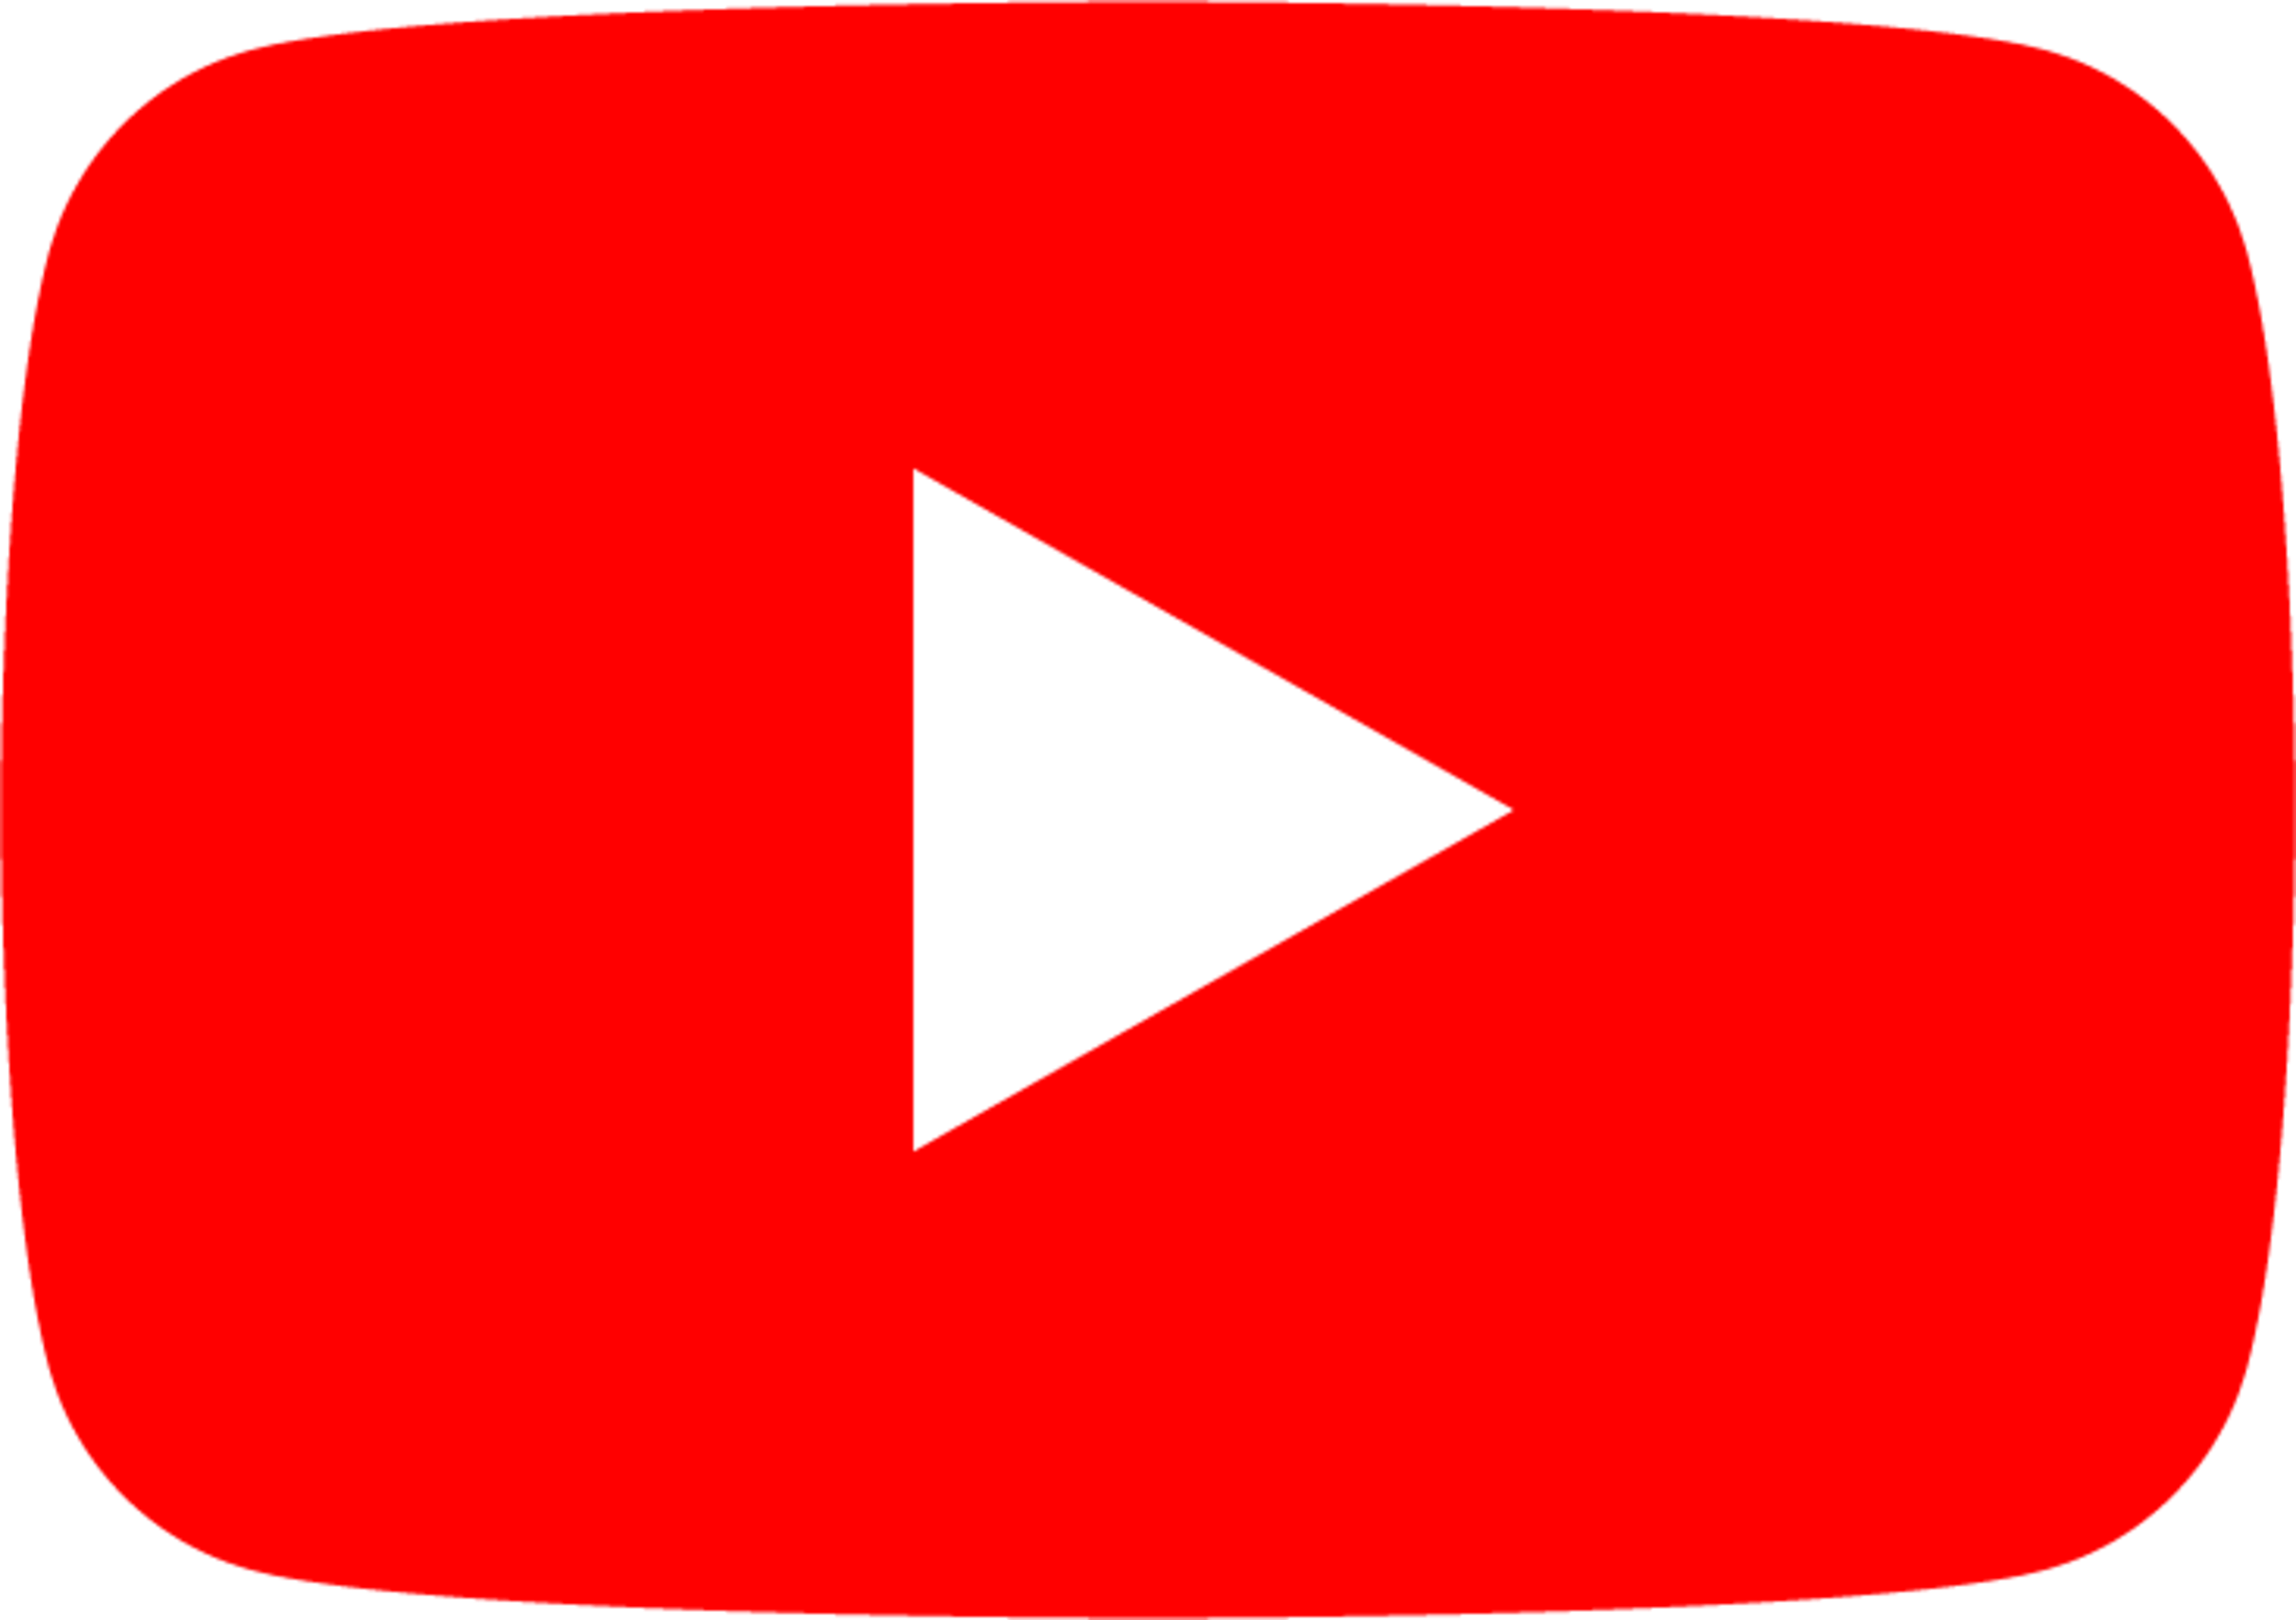 YouTube Icon (https://www.youtube.com/howyoutubeworks/resources/brand-resources/#logos-icons-and-colors)